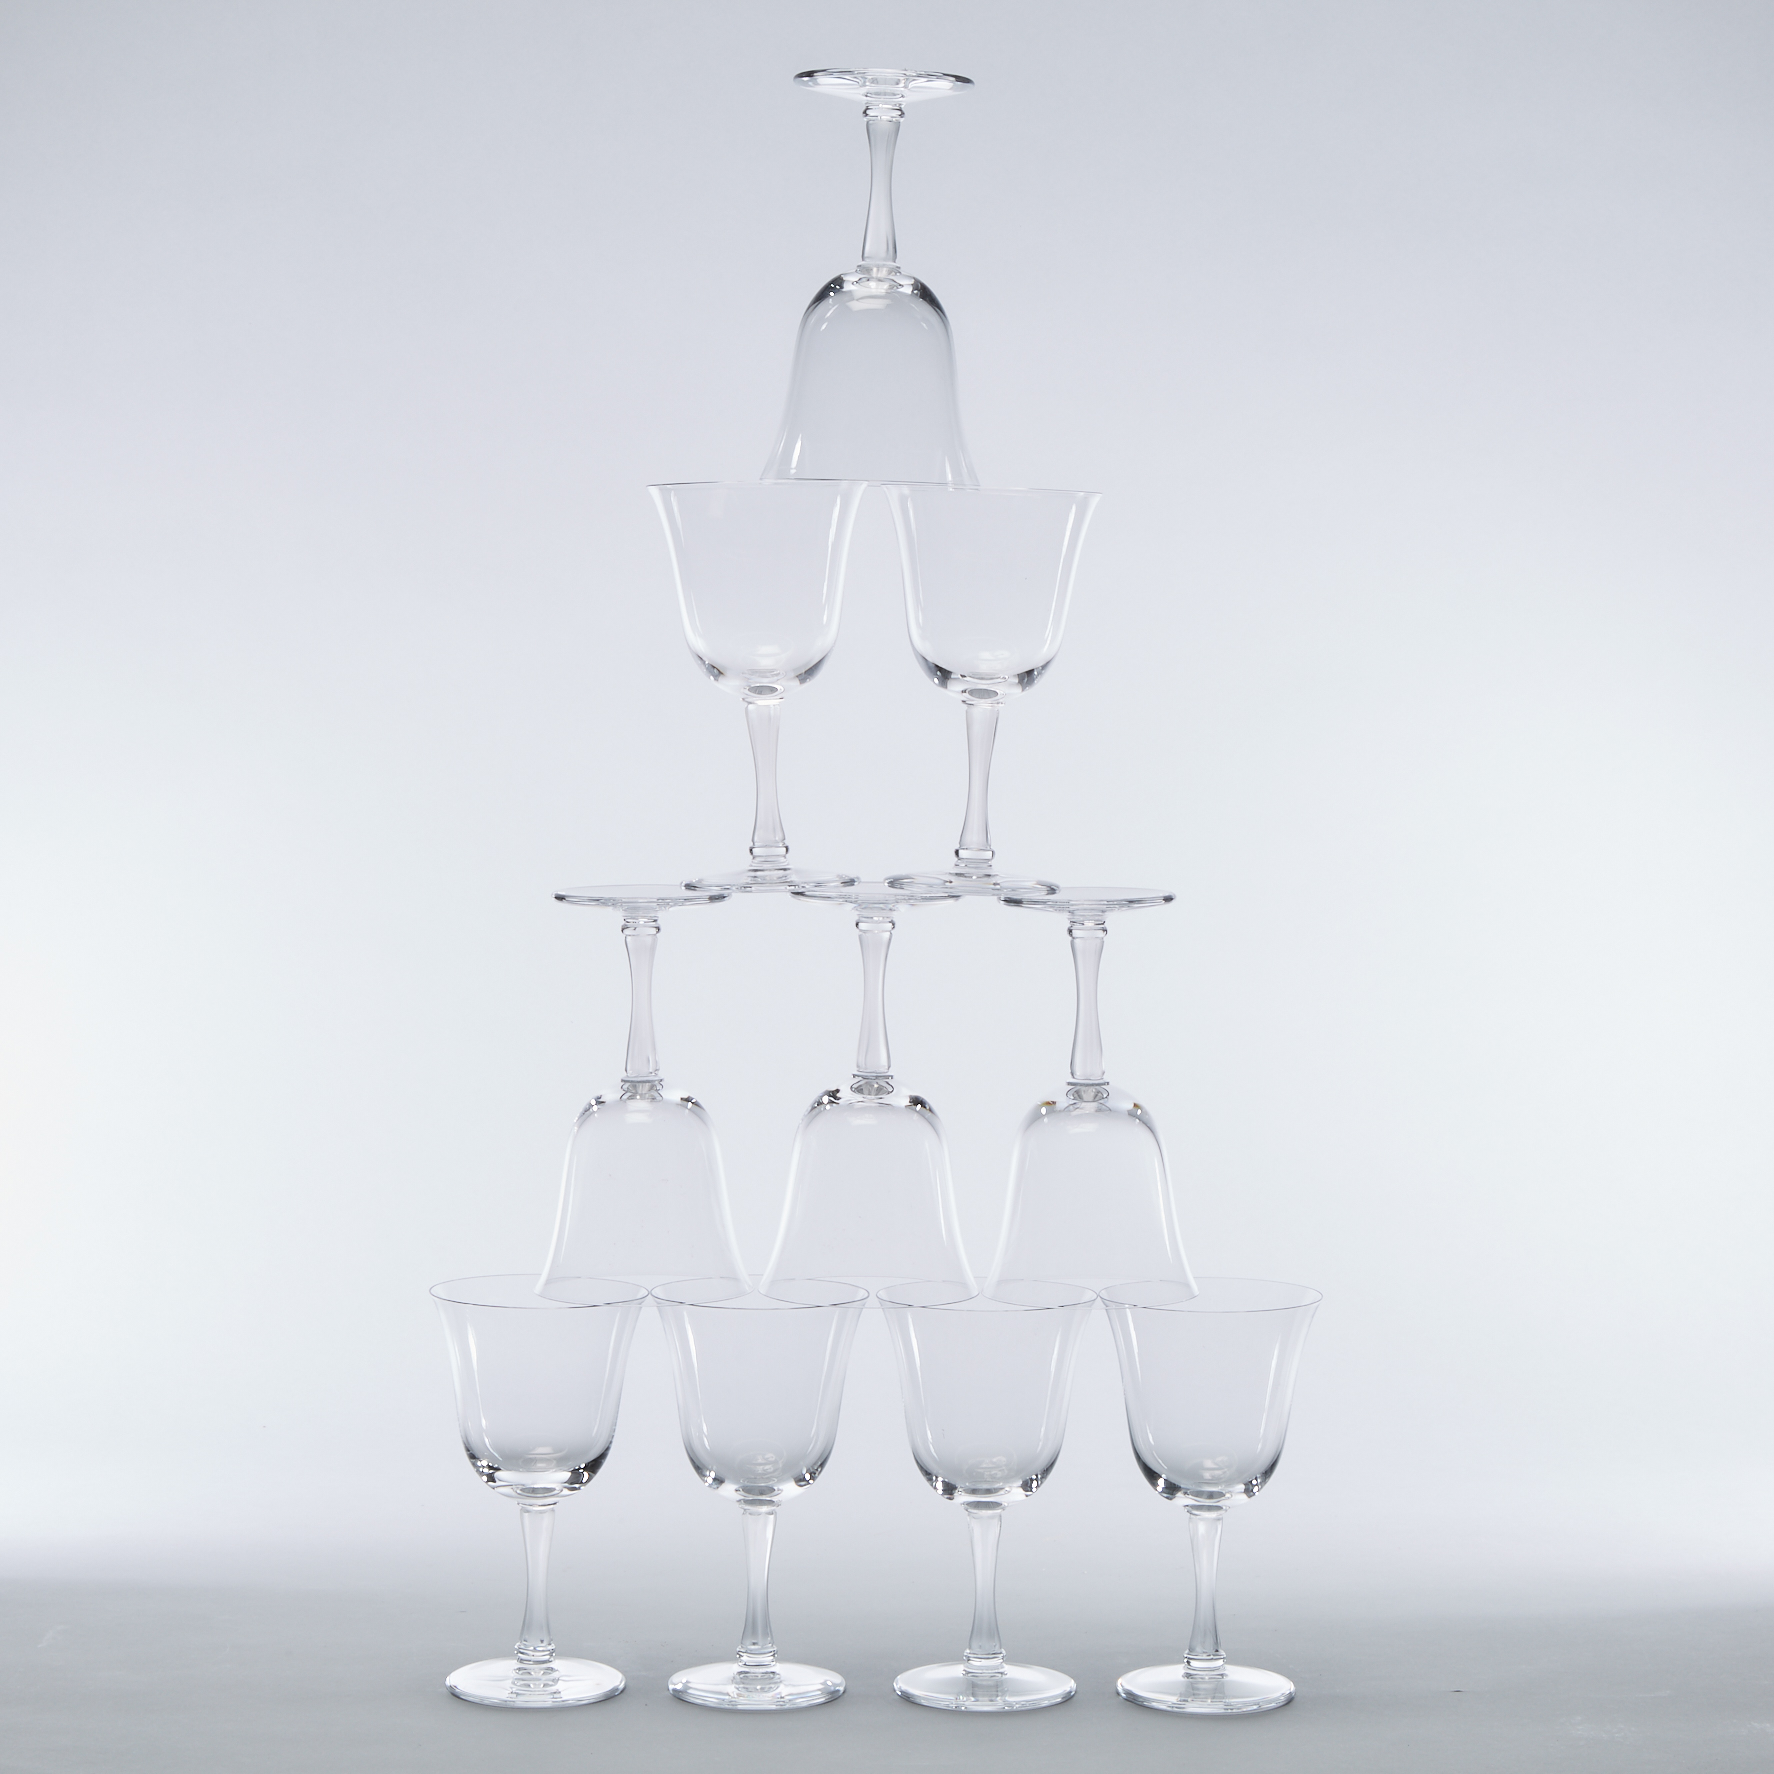 'Barsac', Ten Lalique Moulded and Partly Frosted Glass Wine Glasses, post-1945